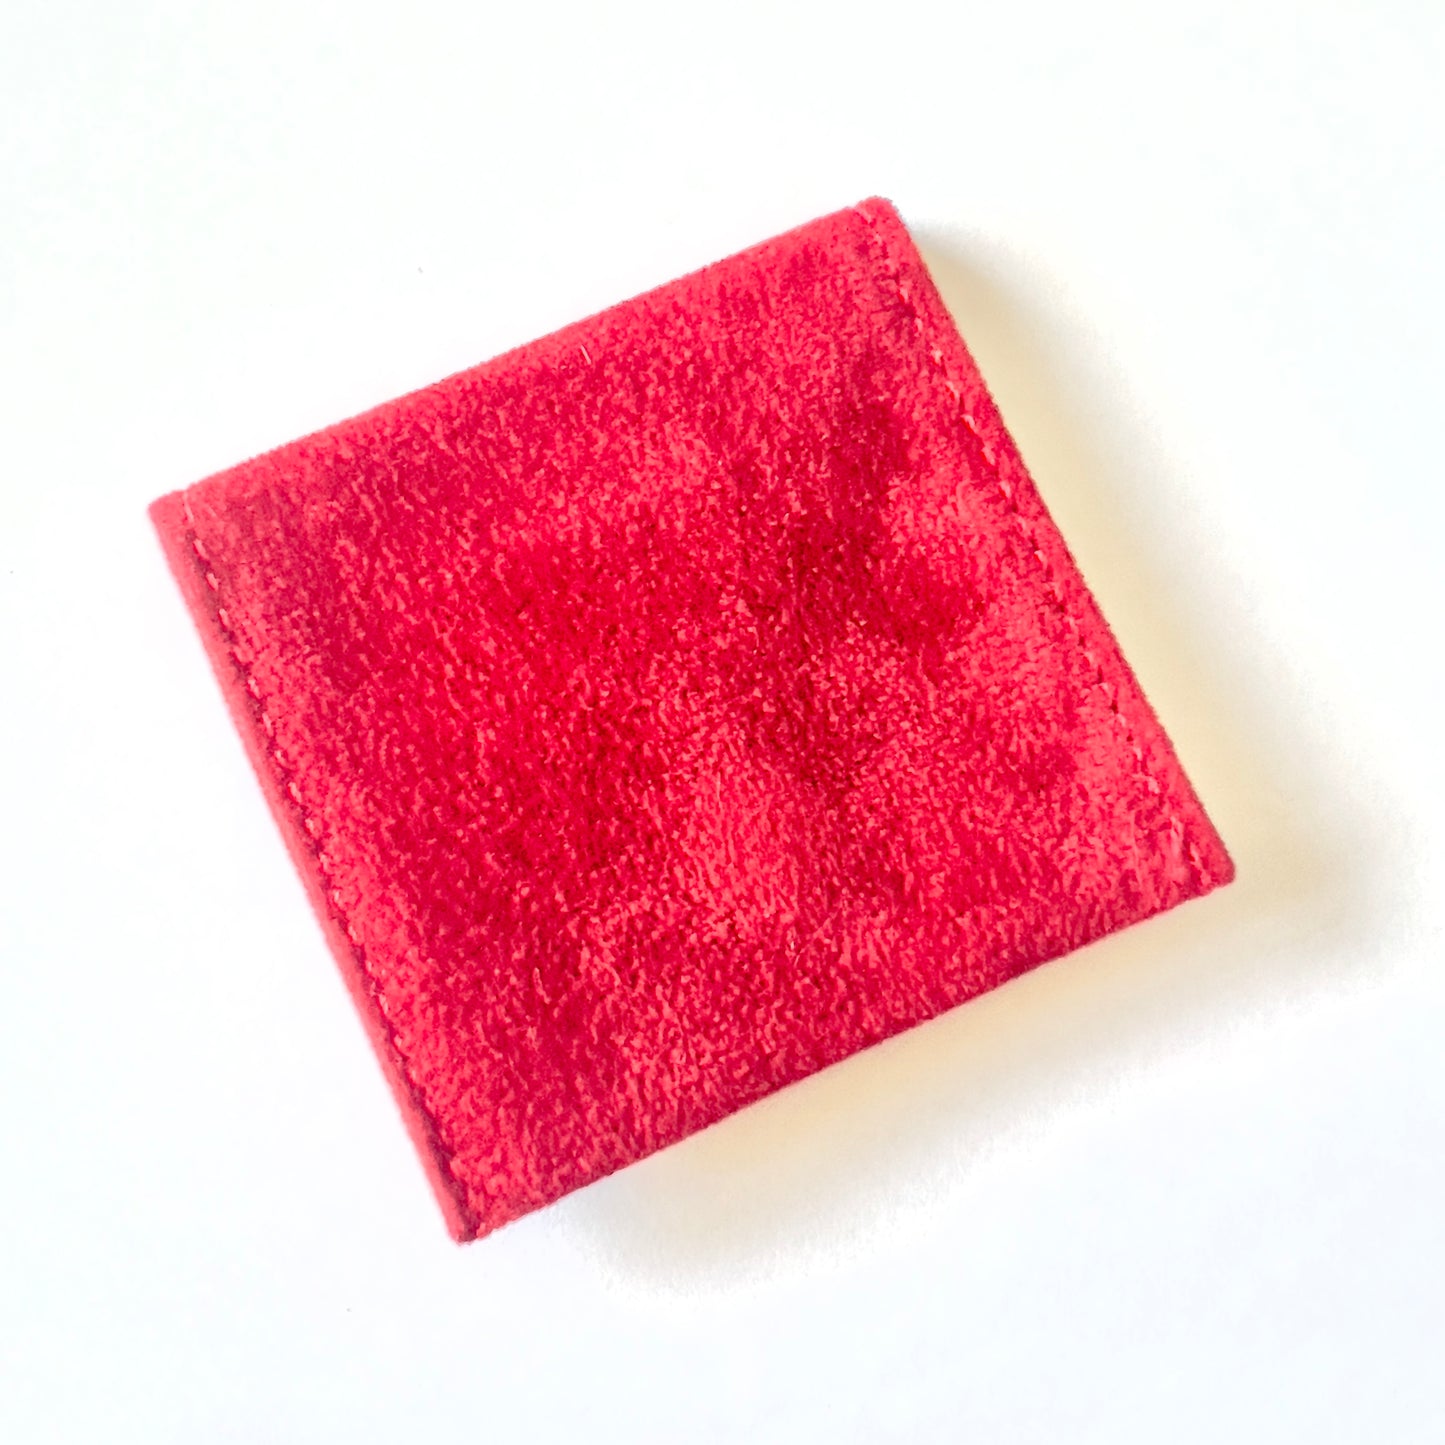 CARTIER Red Faux Suede Jewelry Pouch 2.75x2.5 inches